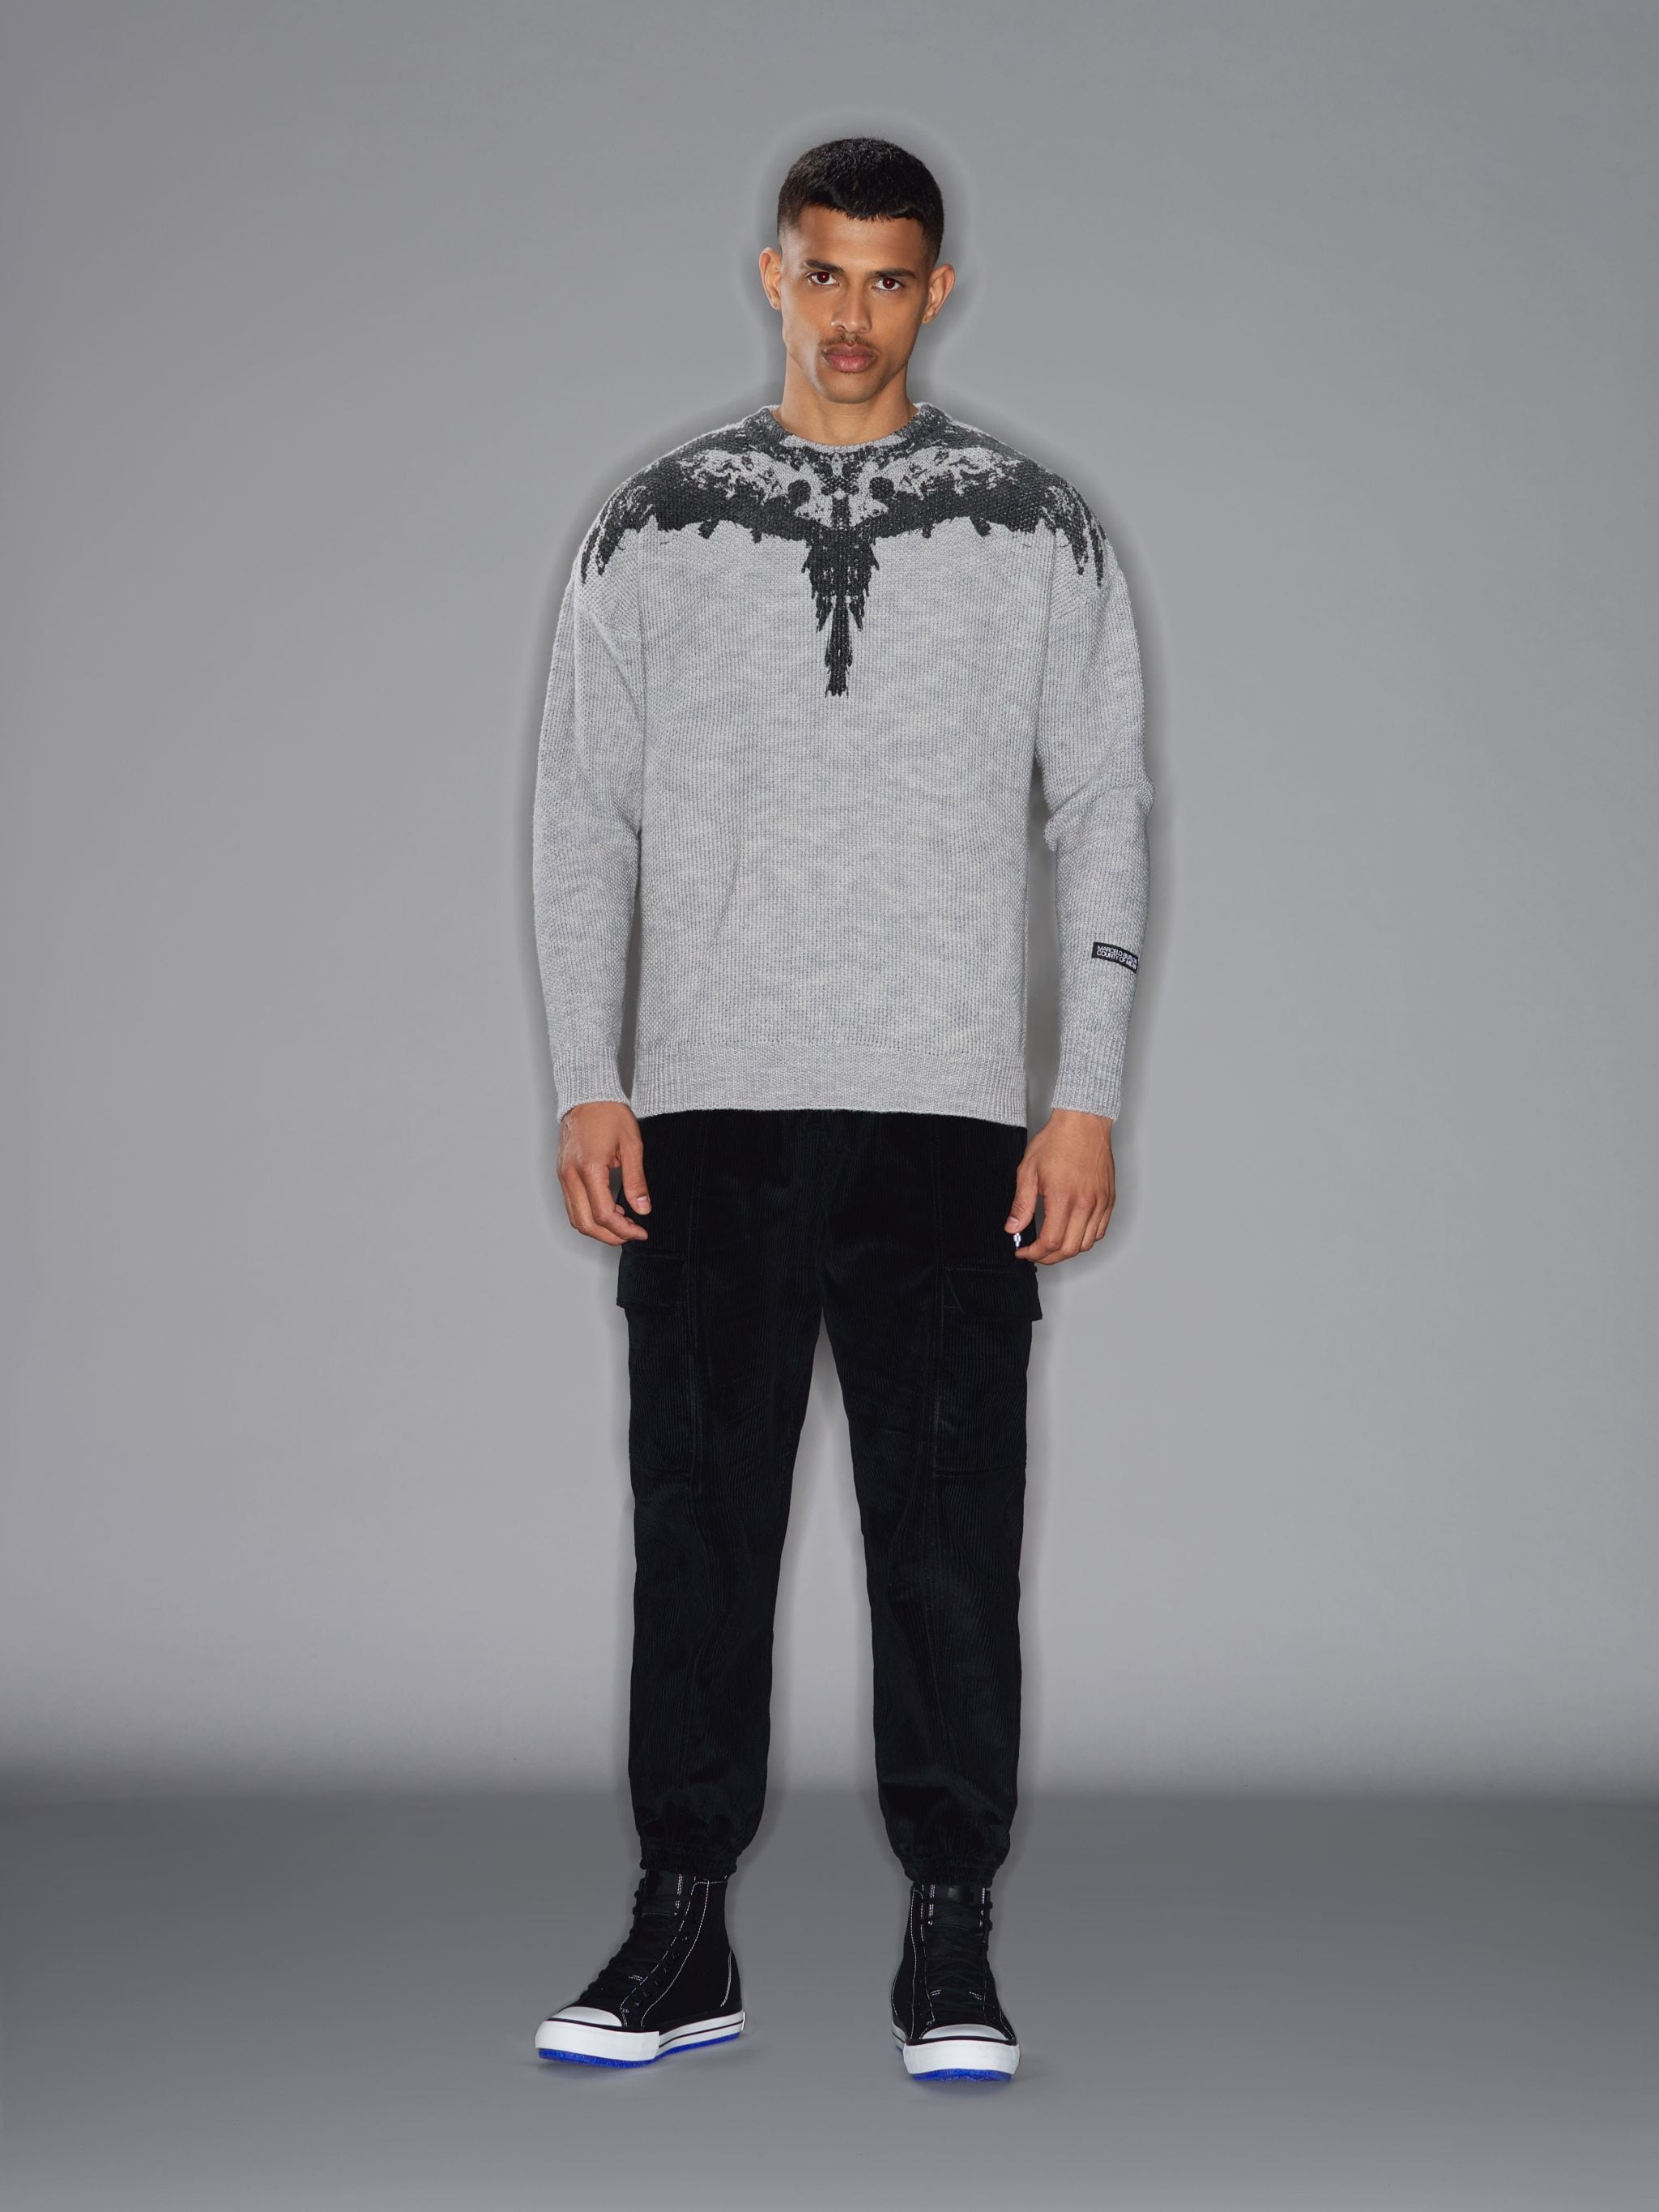 Grey wool Tempera Wings print jumper from Marcelo Burlon County of Milan featuring crew neck, drop shoulder, long sleeves, ribbed cuffs, ribbed hem and wings print.